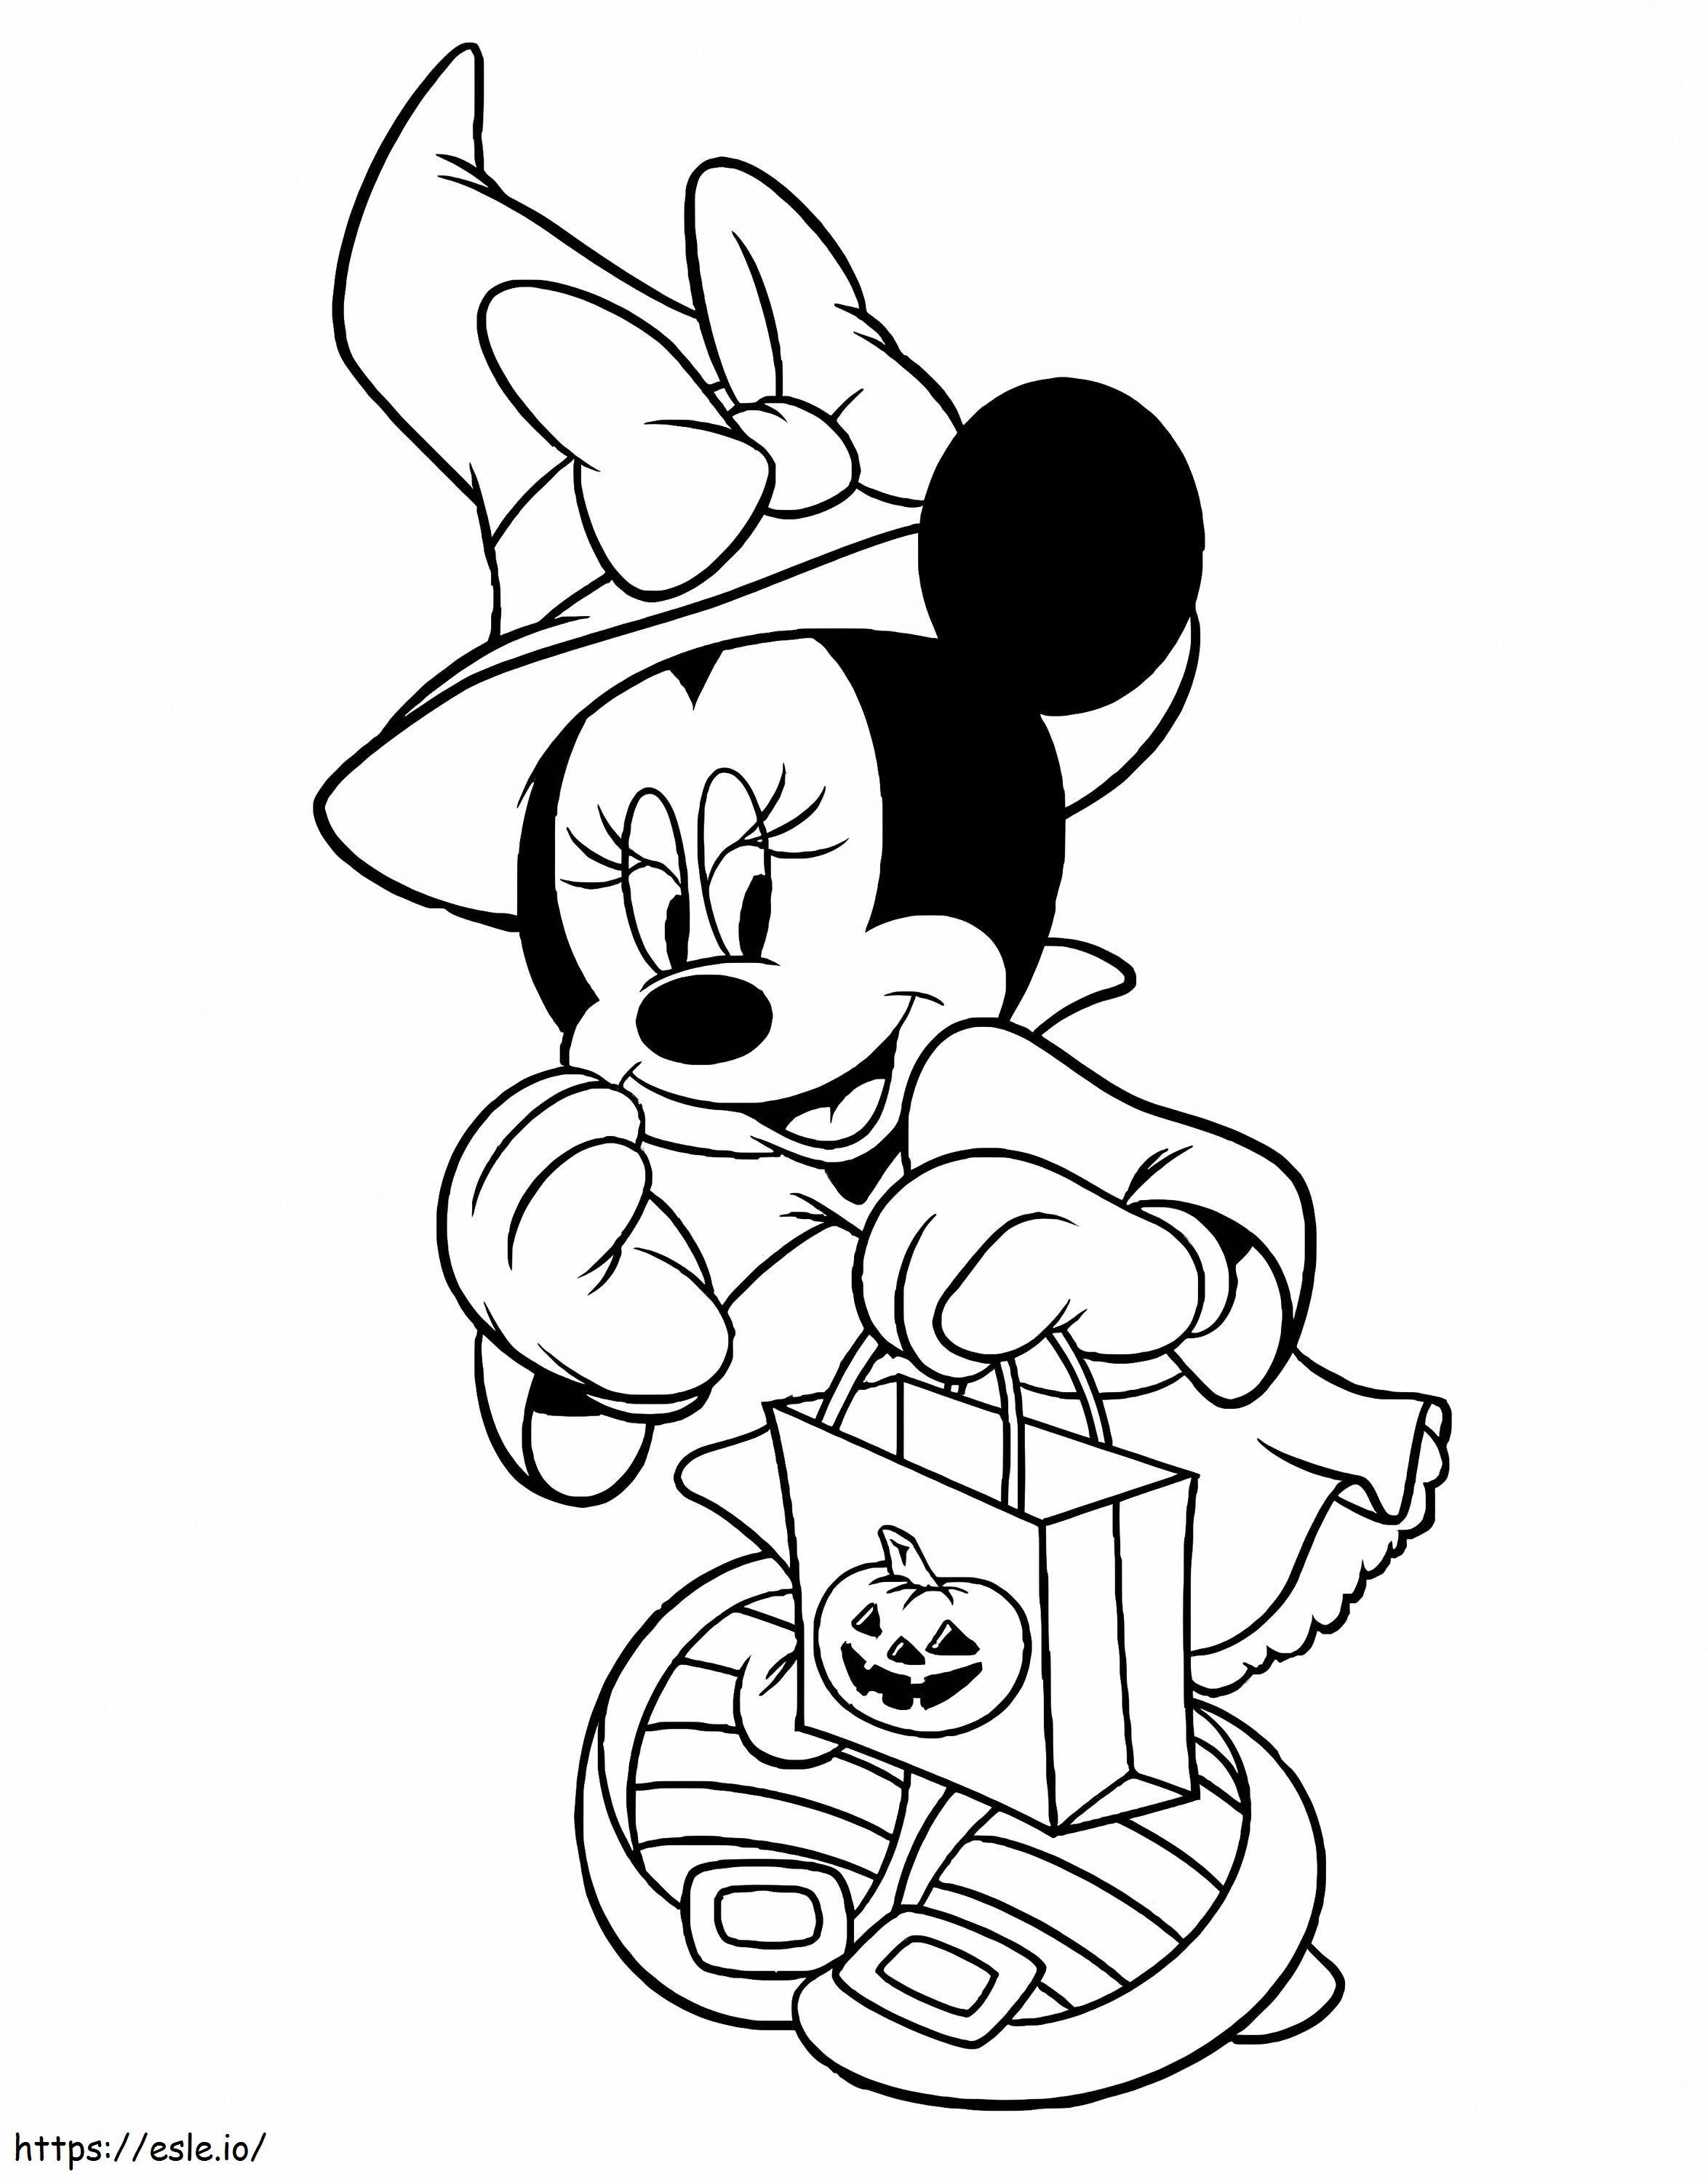 Witchy Minnie Mouse coloring page